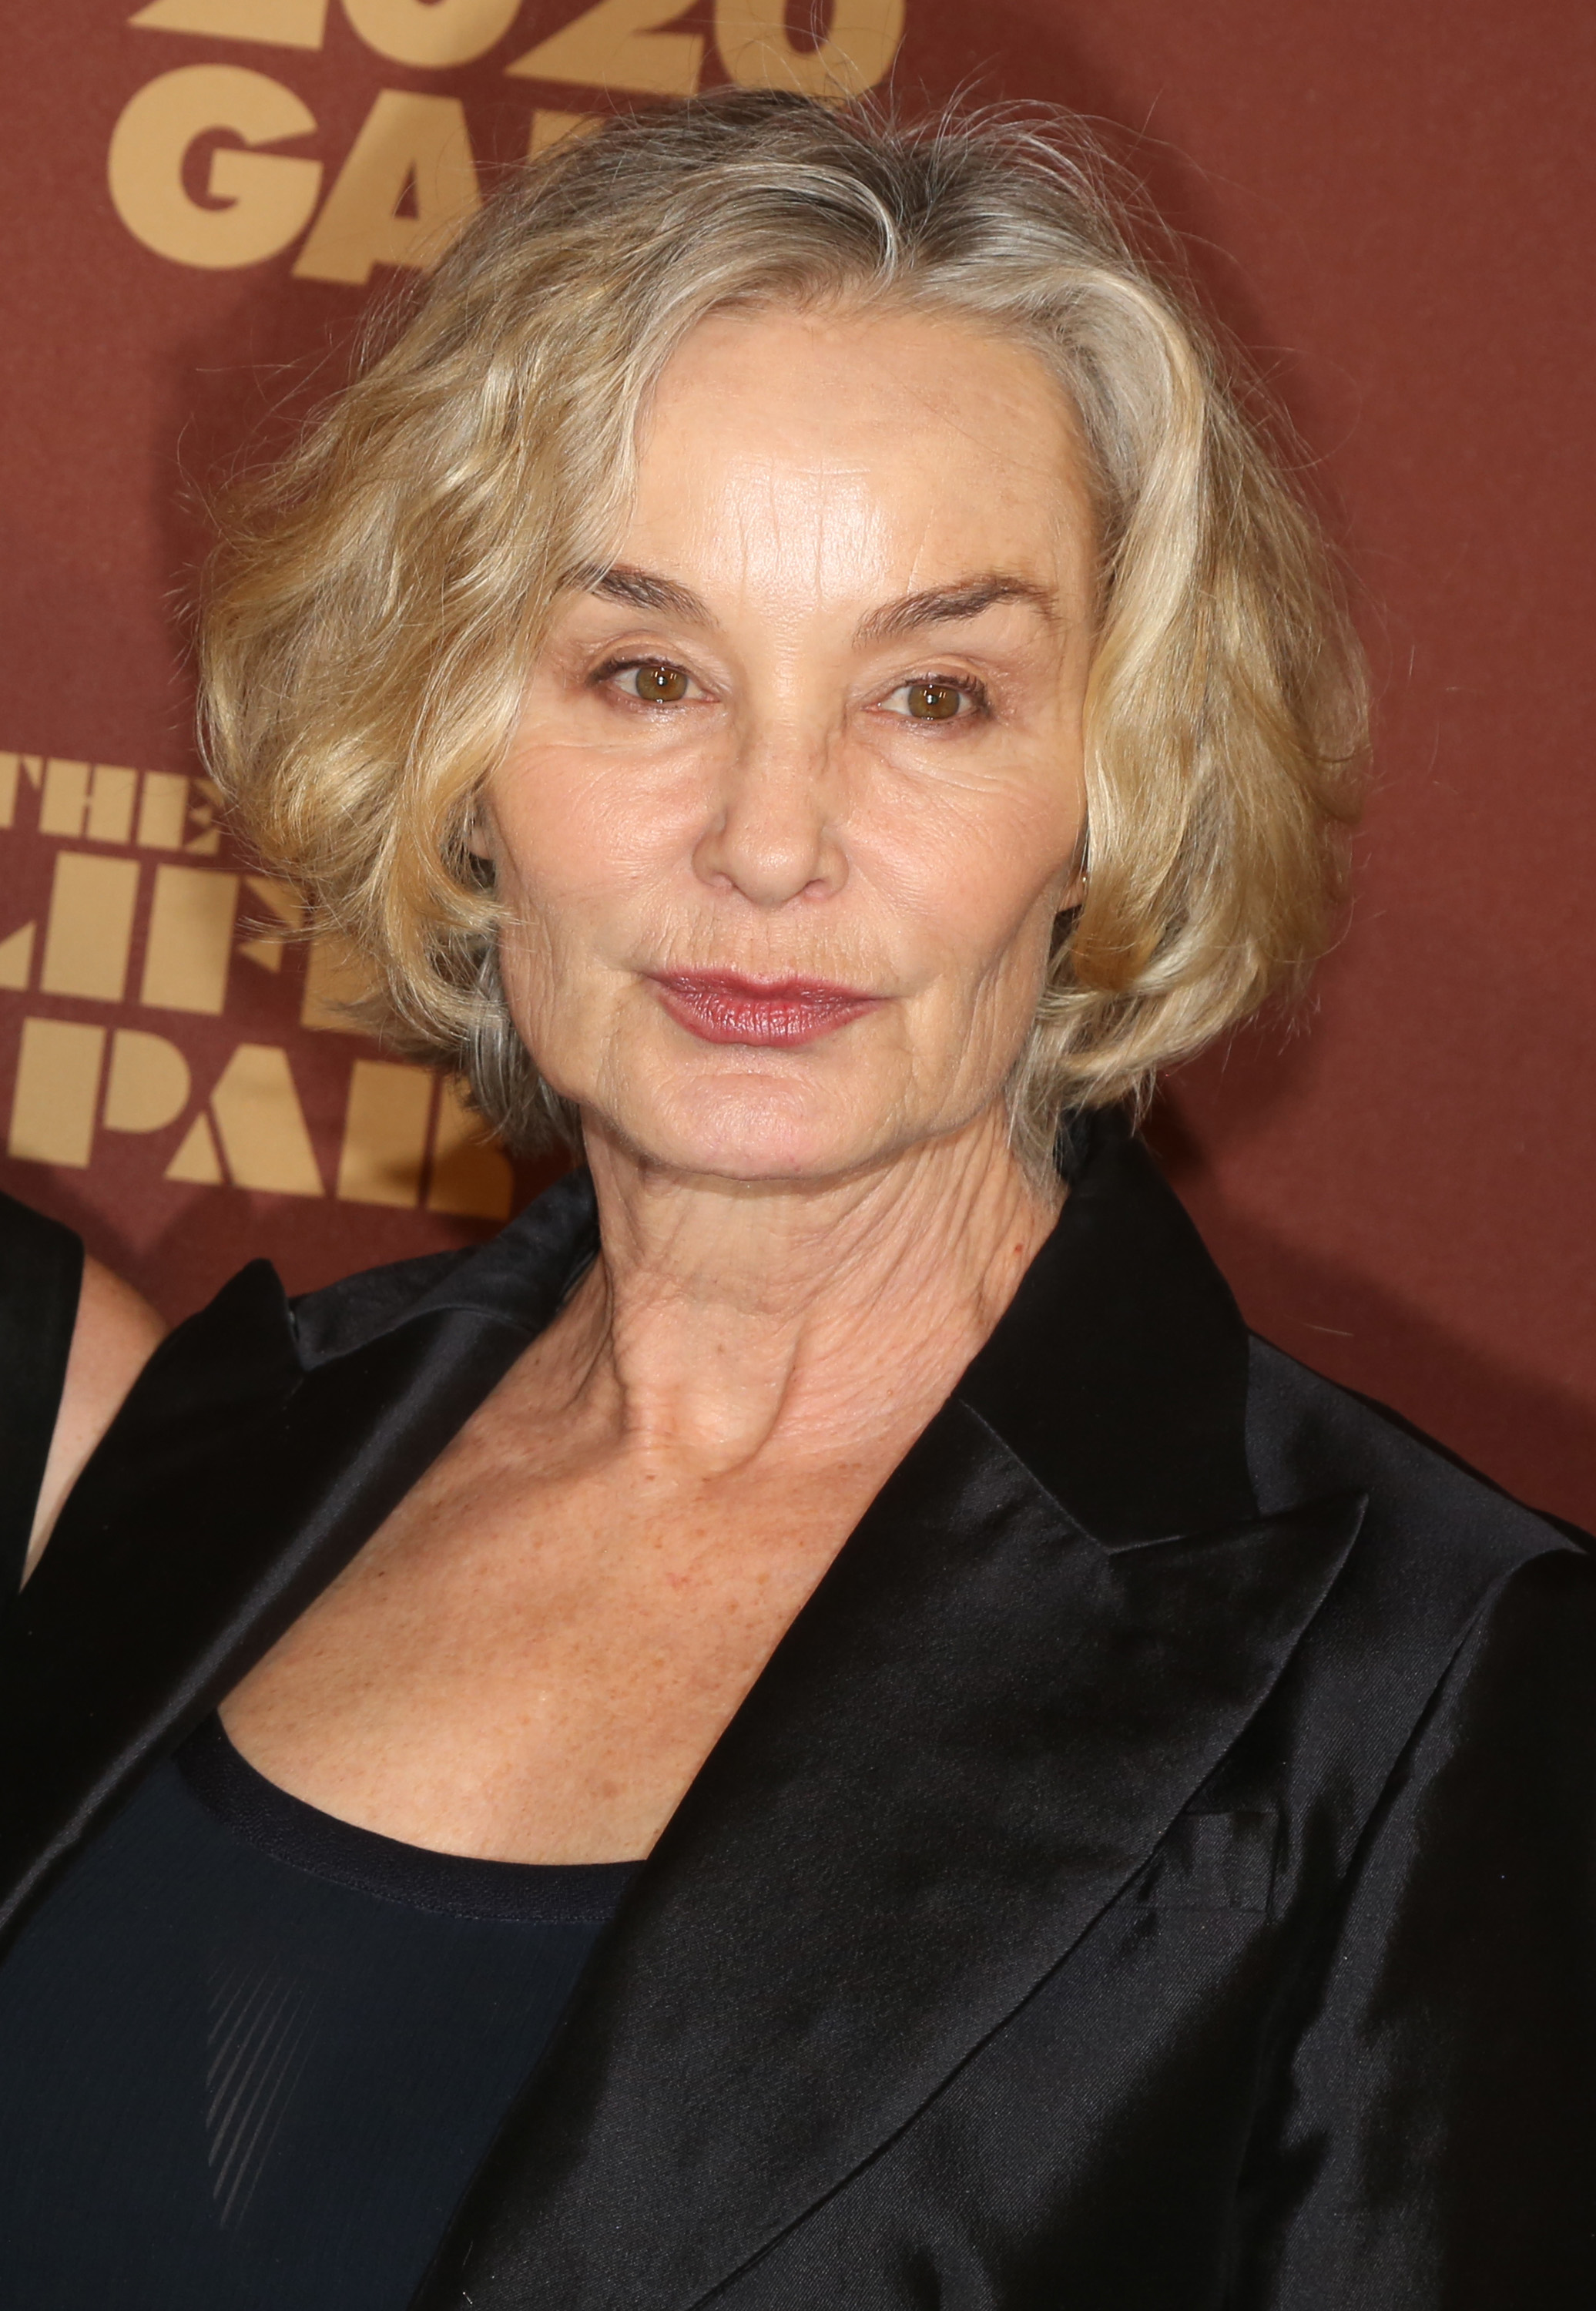 Jessica Lange poses at the 2020 Roundabout Theater Gala honoring Alan Cumming, Michael Kors & Lance LePere at The Ziegfeld Ballroom on March 2, 2020 in New York City. |  Source: Getty Images